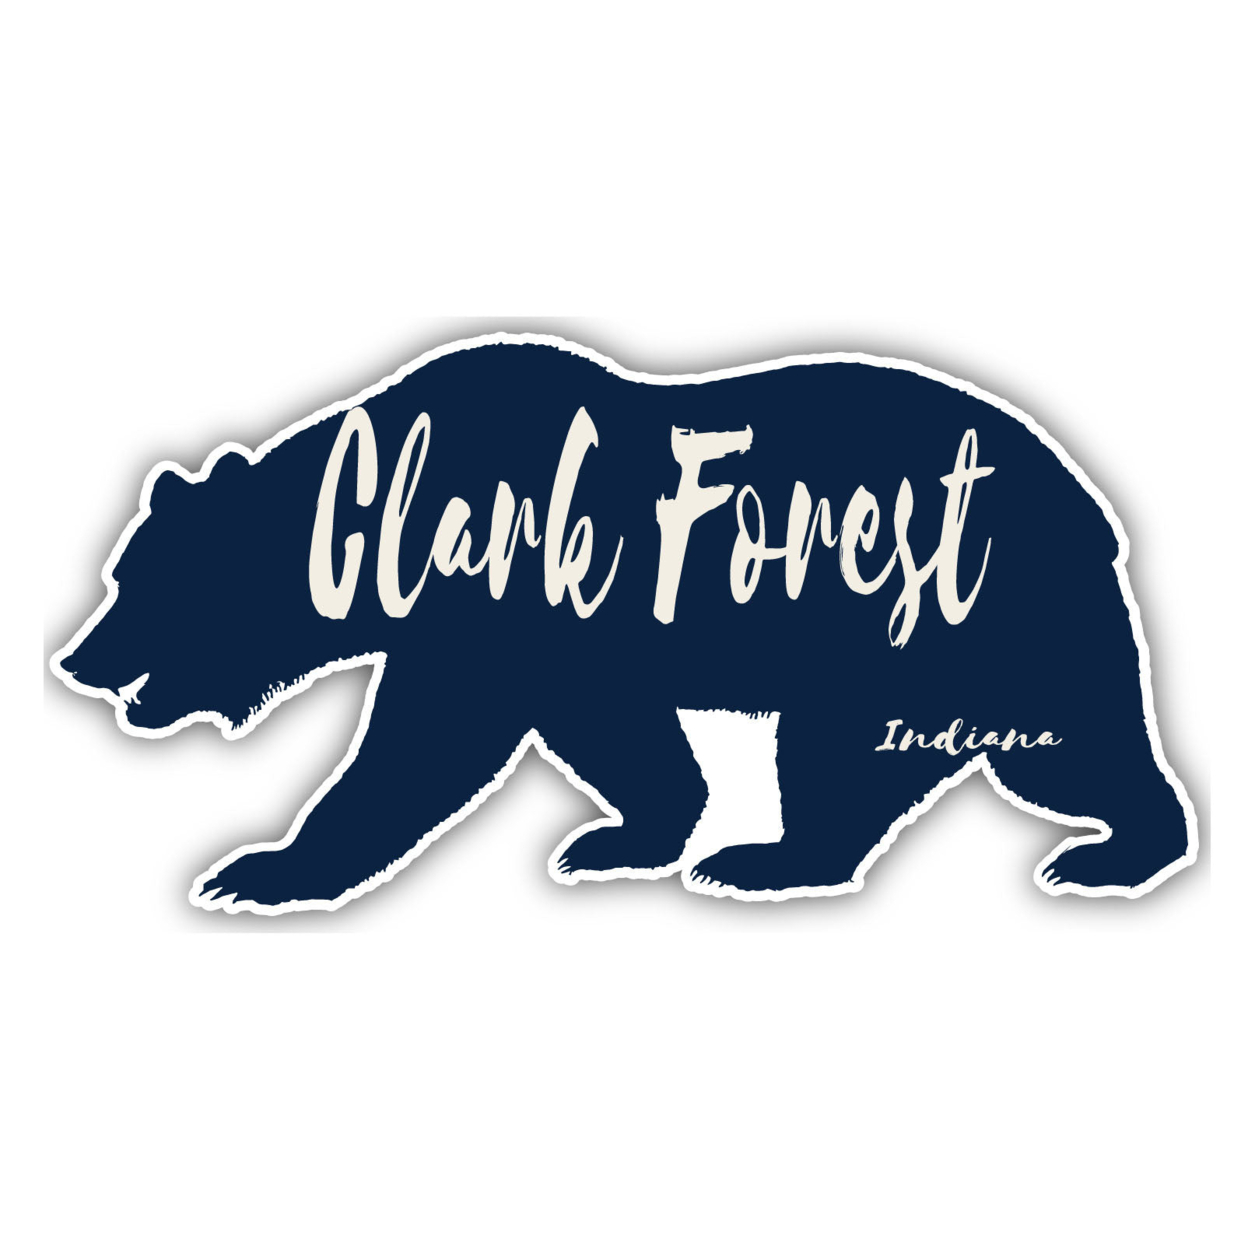 Clark Forest Indiana Souvenir Decorative Stickers (Choose Theme And Size) - Single Unit, 8-Inch, Bear